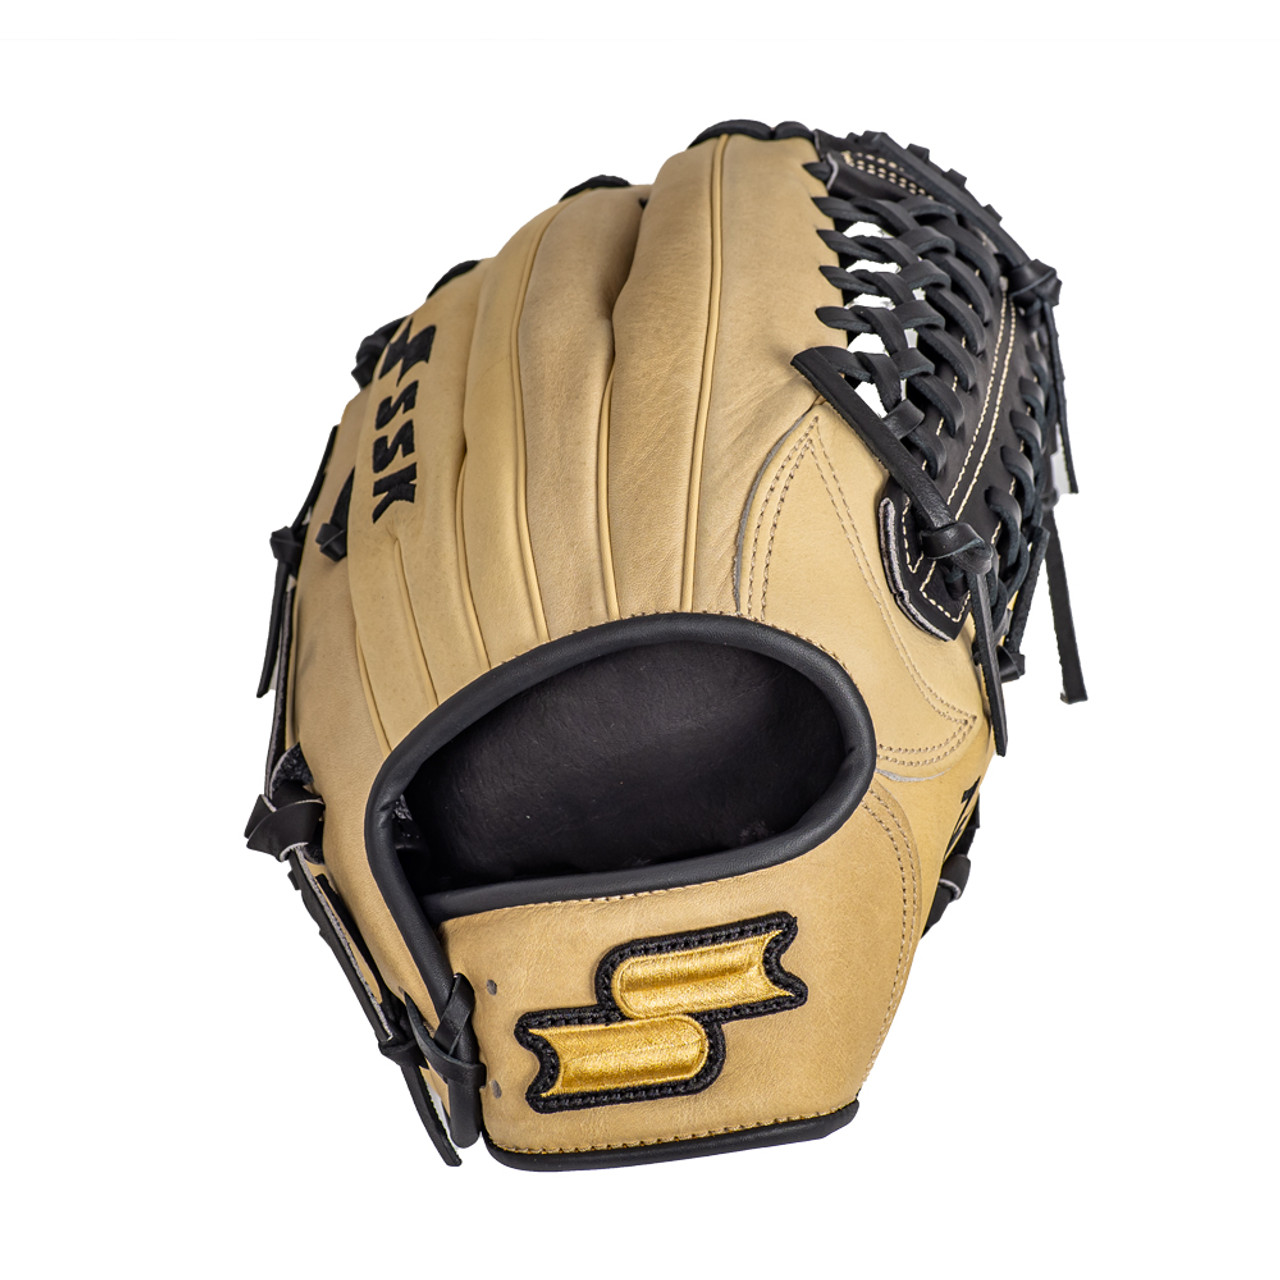 SSK on X: The Z5 Craftsman Series was designed for players who